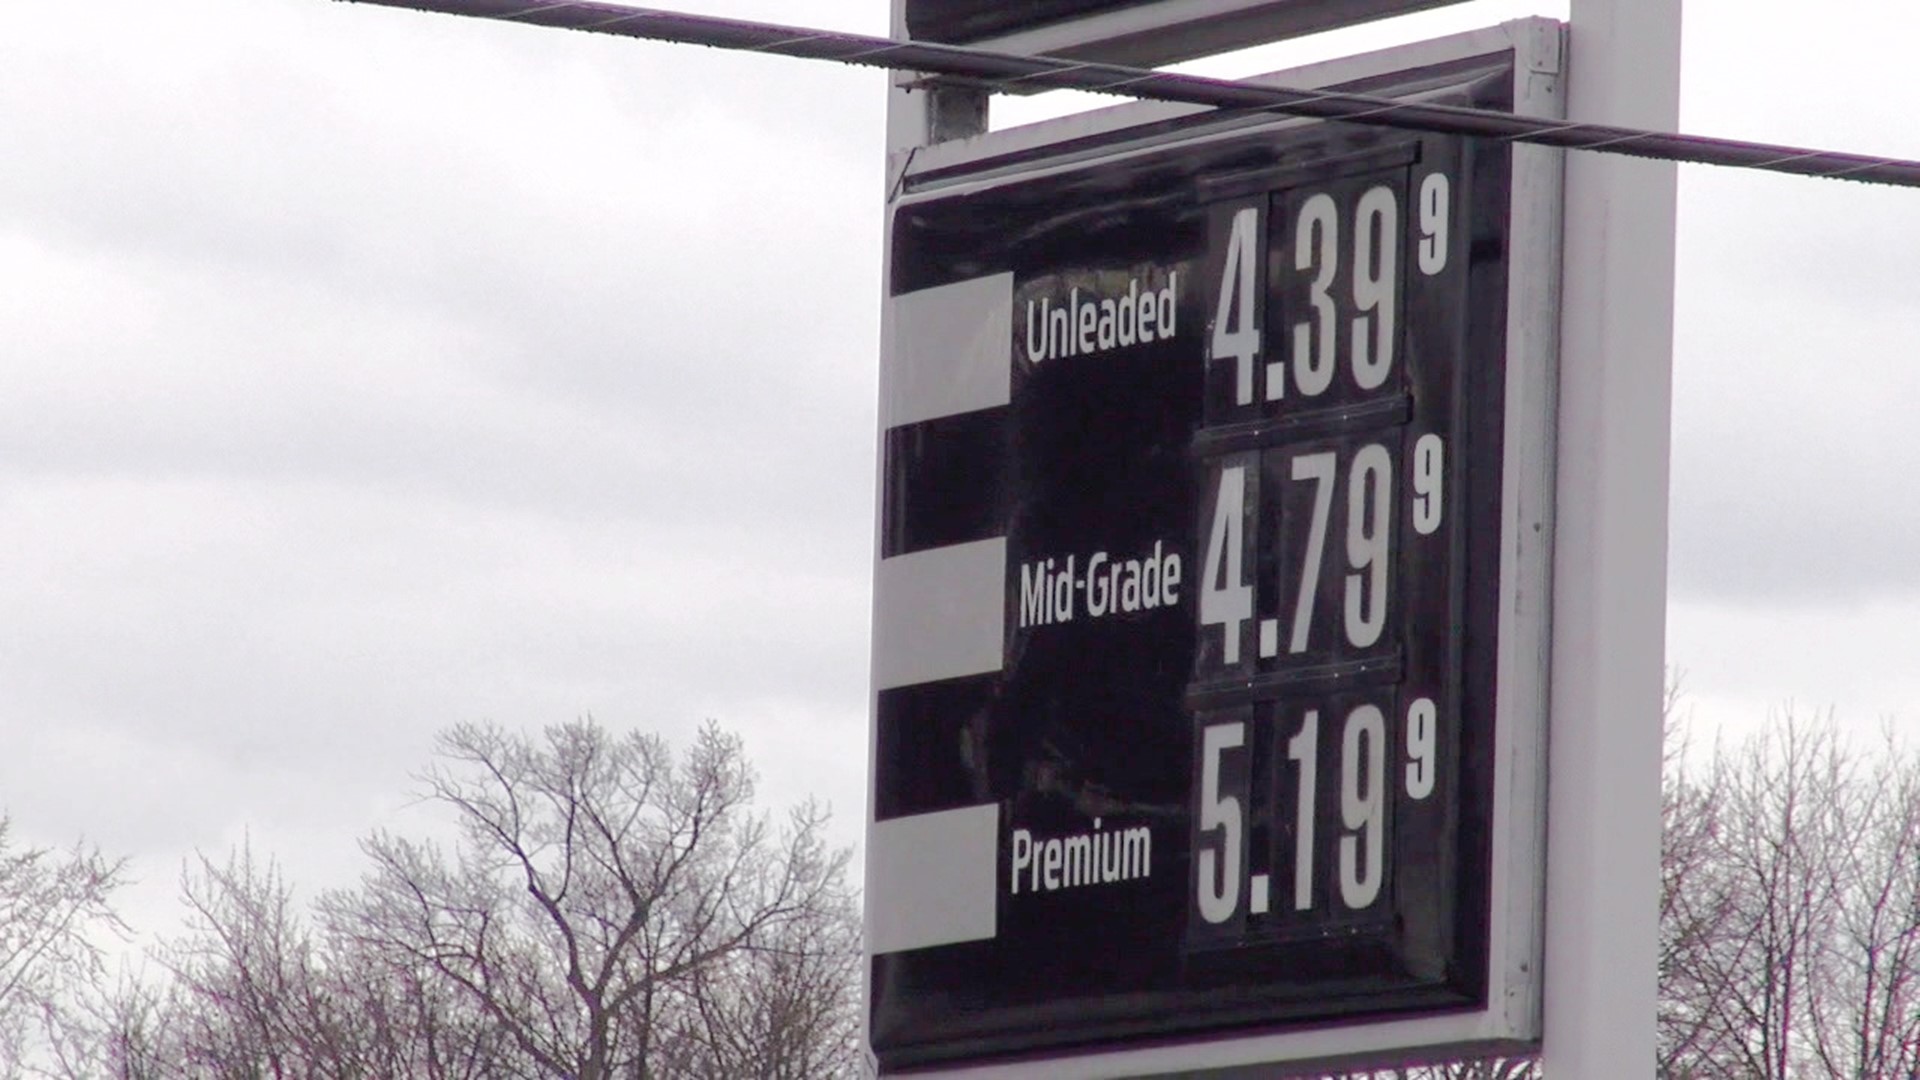 Newswatch 16's Courtney Harrison spoke with people about the big jump in prices at the pump.